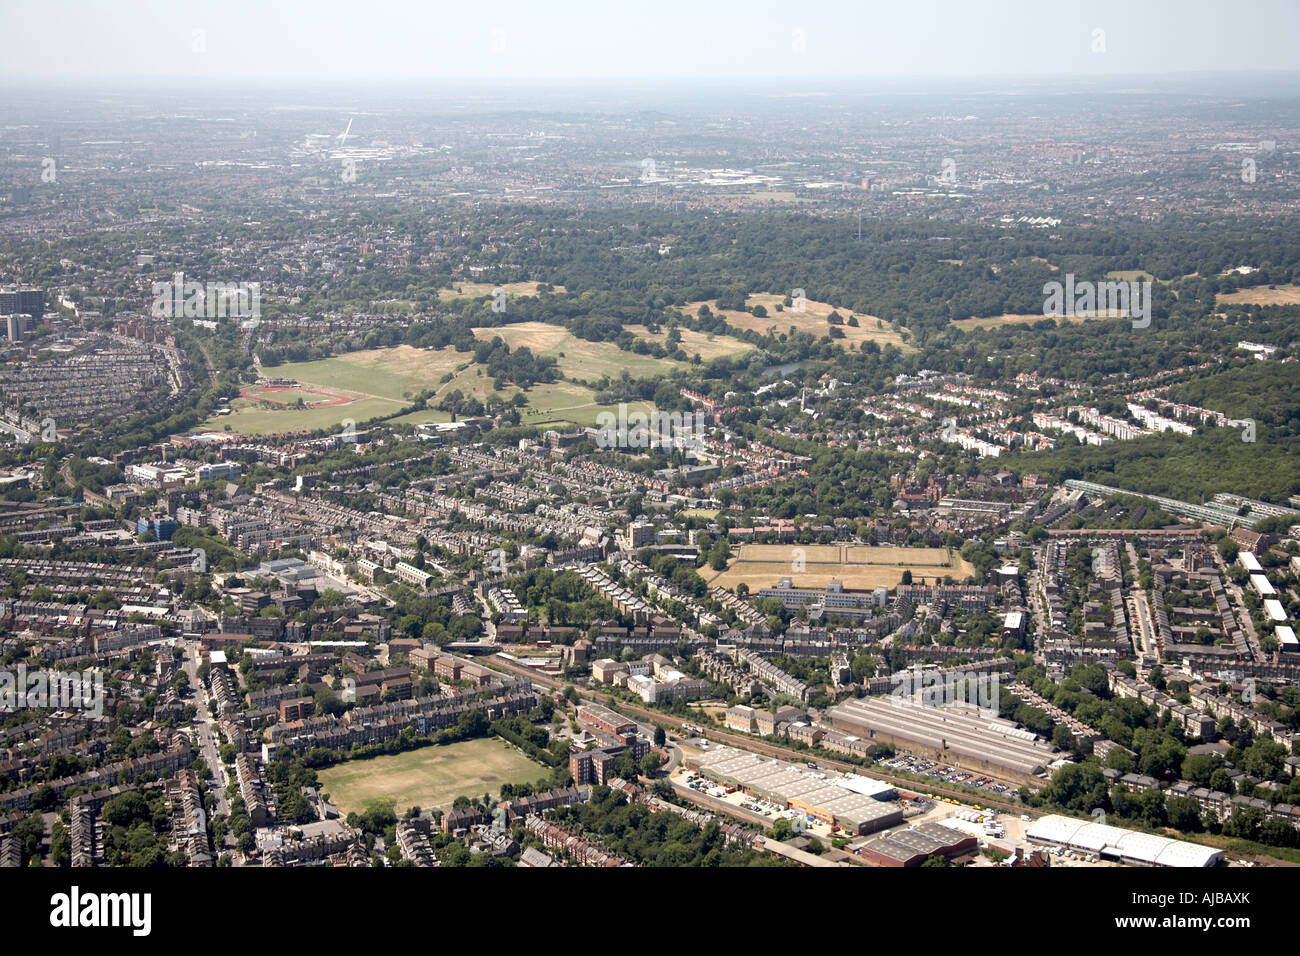 Aerial view north west of Hampstead Heath and Haringey suburban housing London N6 NW5 England UK High level oblique Stock Photo